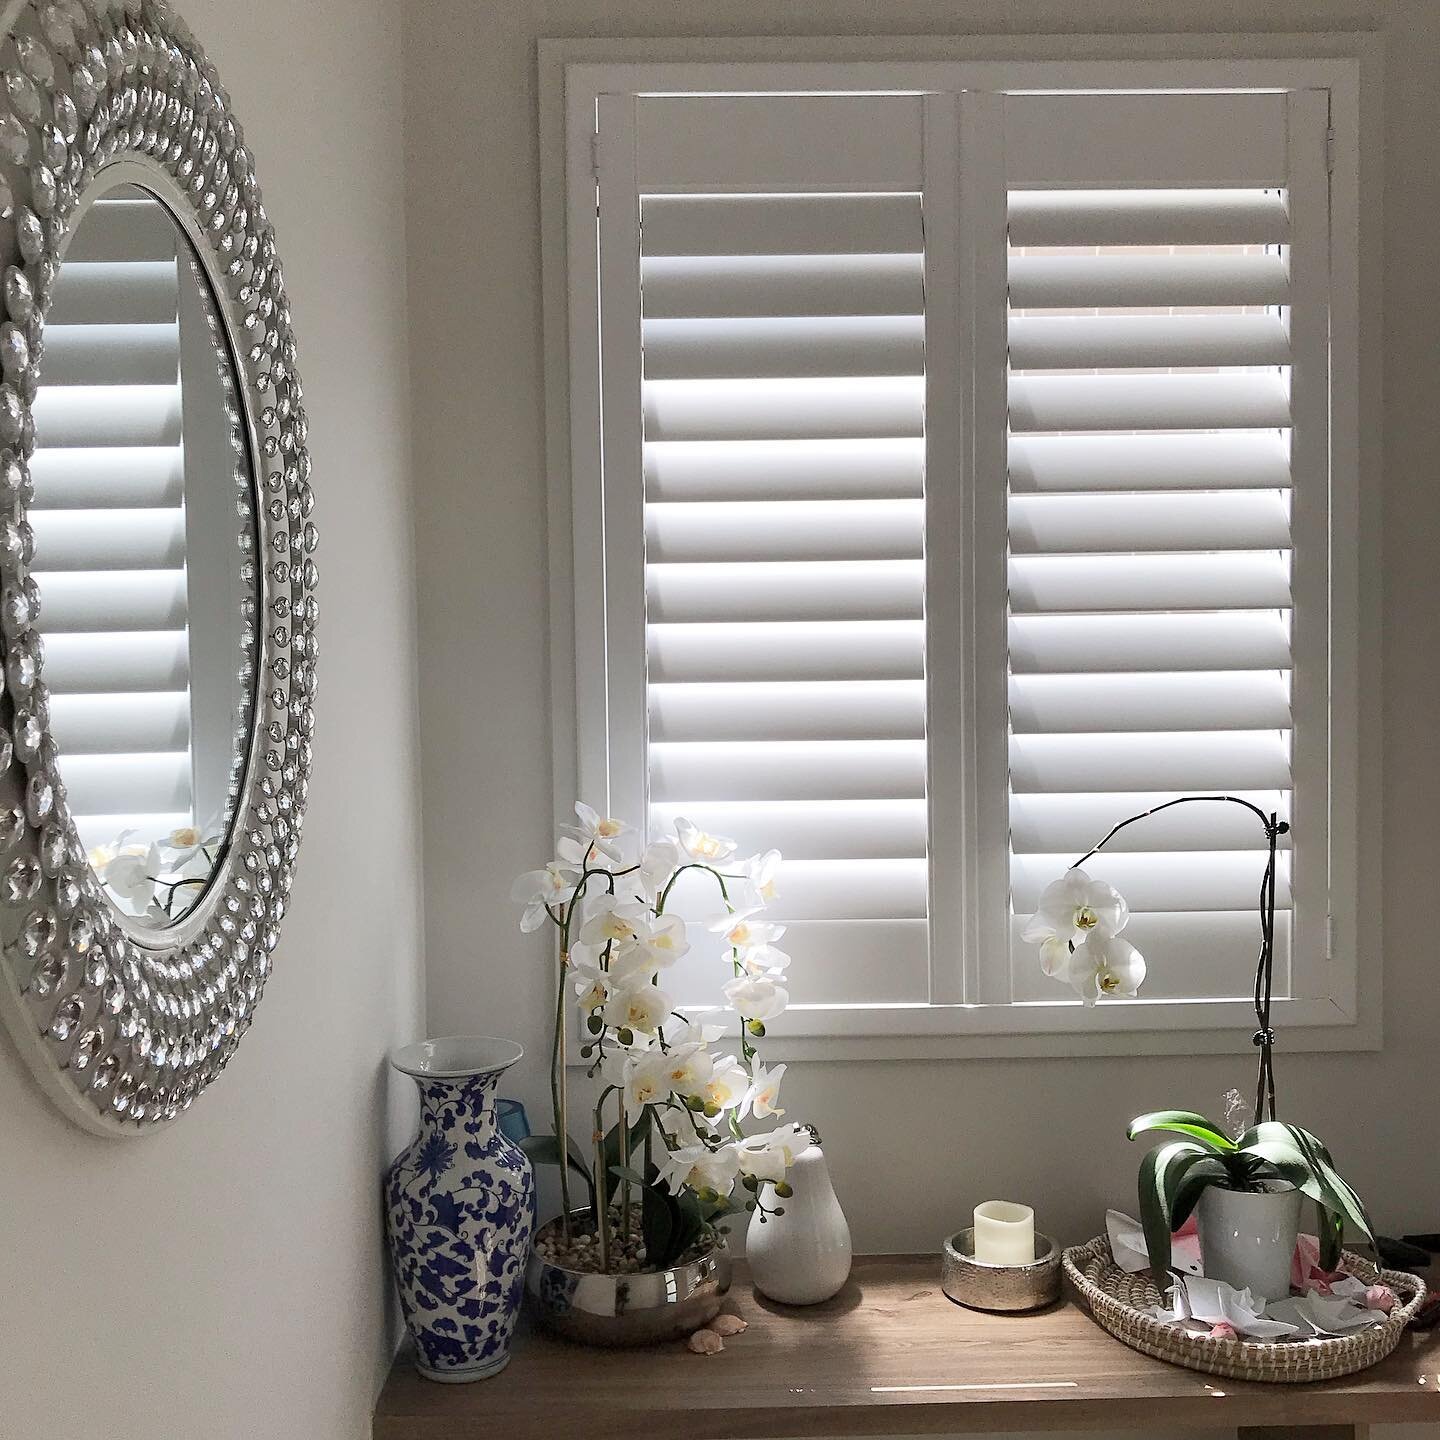 Our Plantation shutters added a sleek, clean look to this window on entry. They brighten any room while giving you complete privacy. 
@normanaustralia